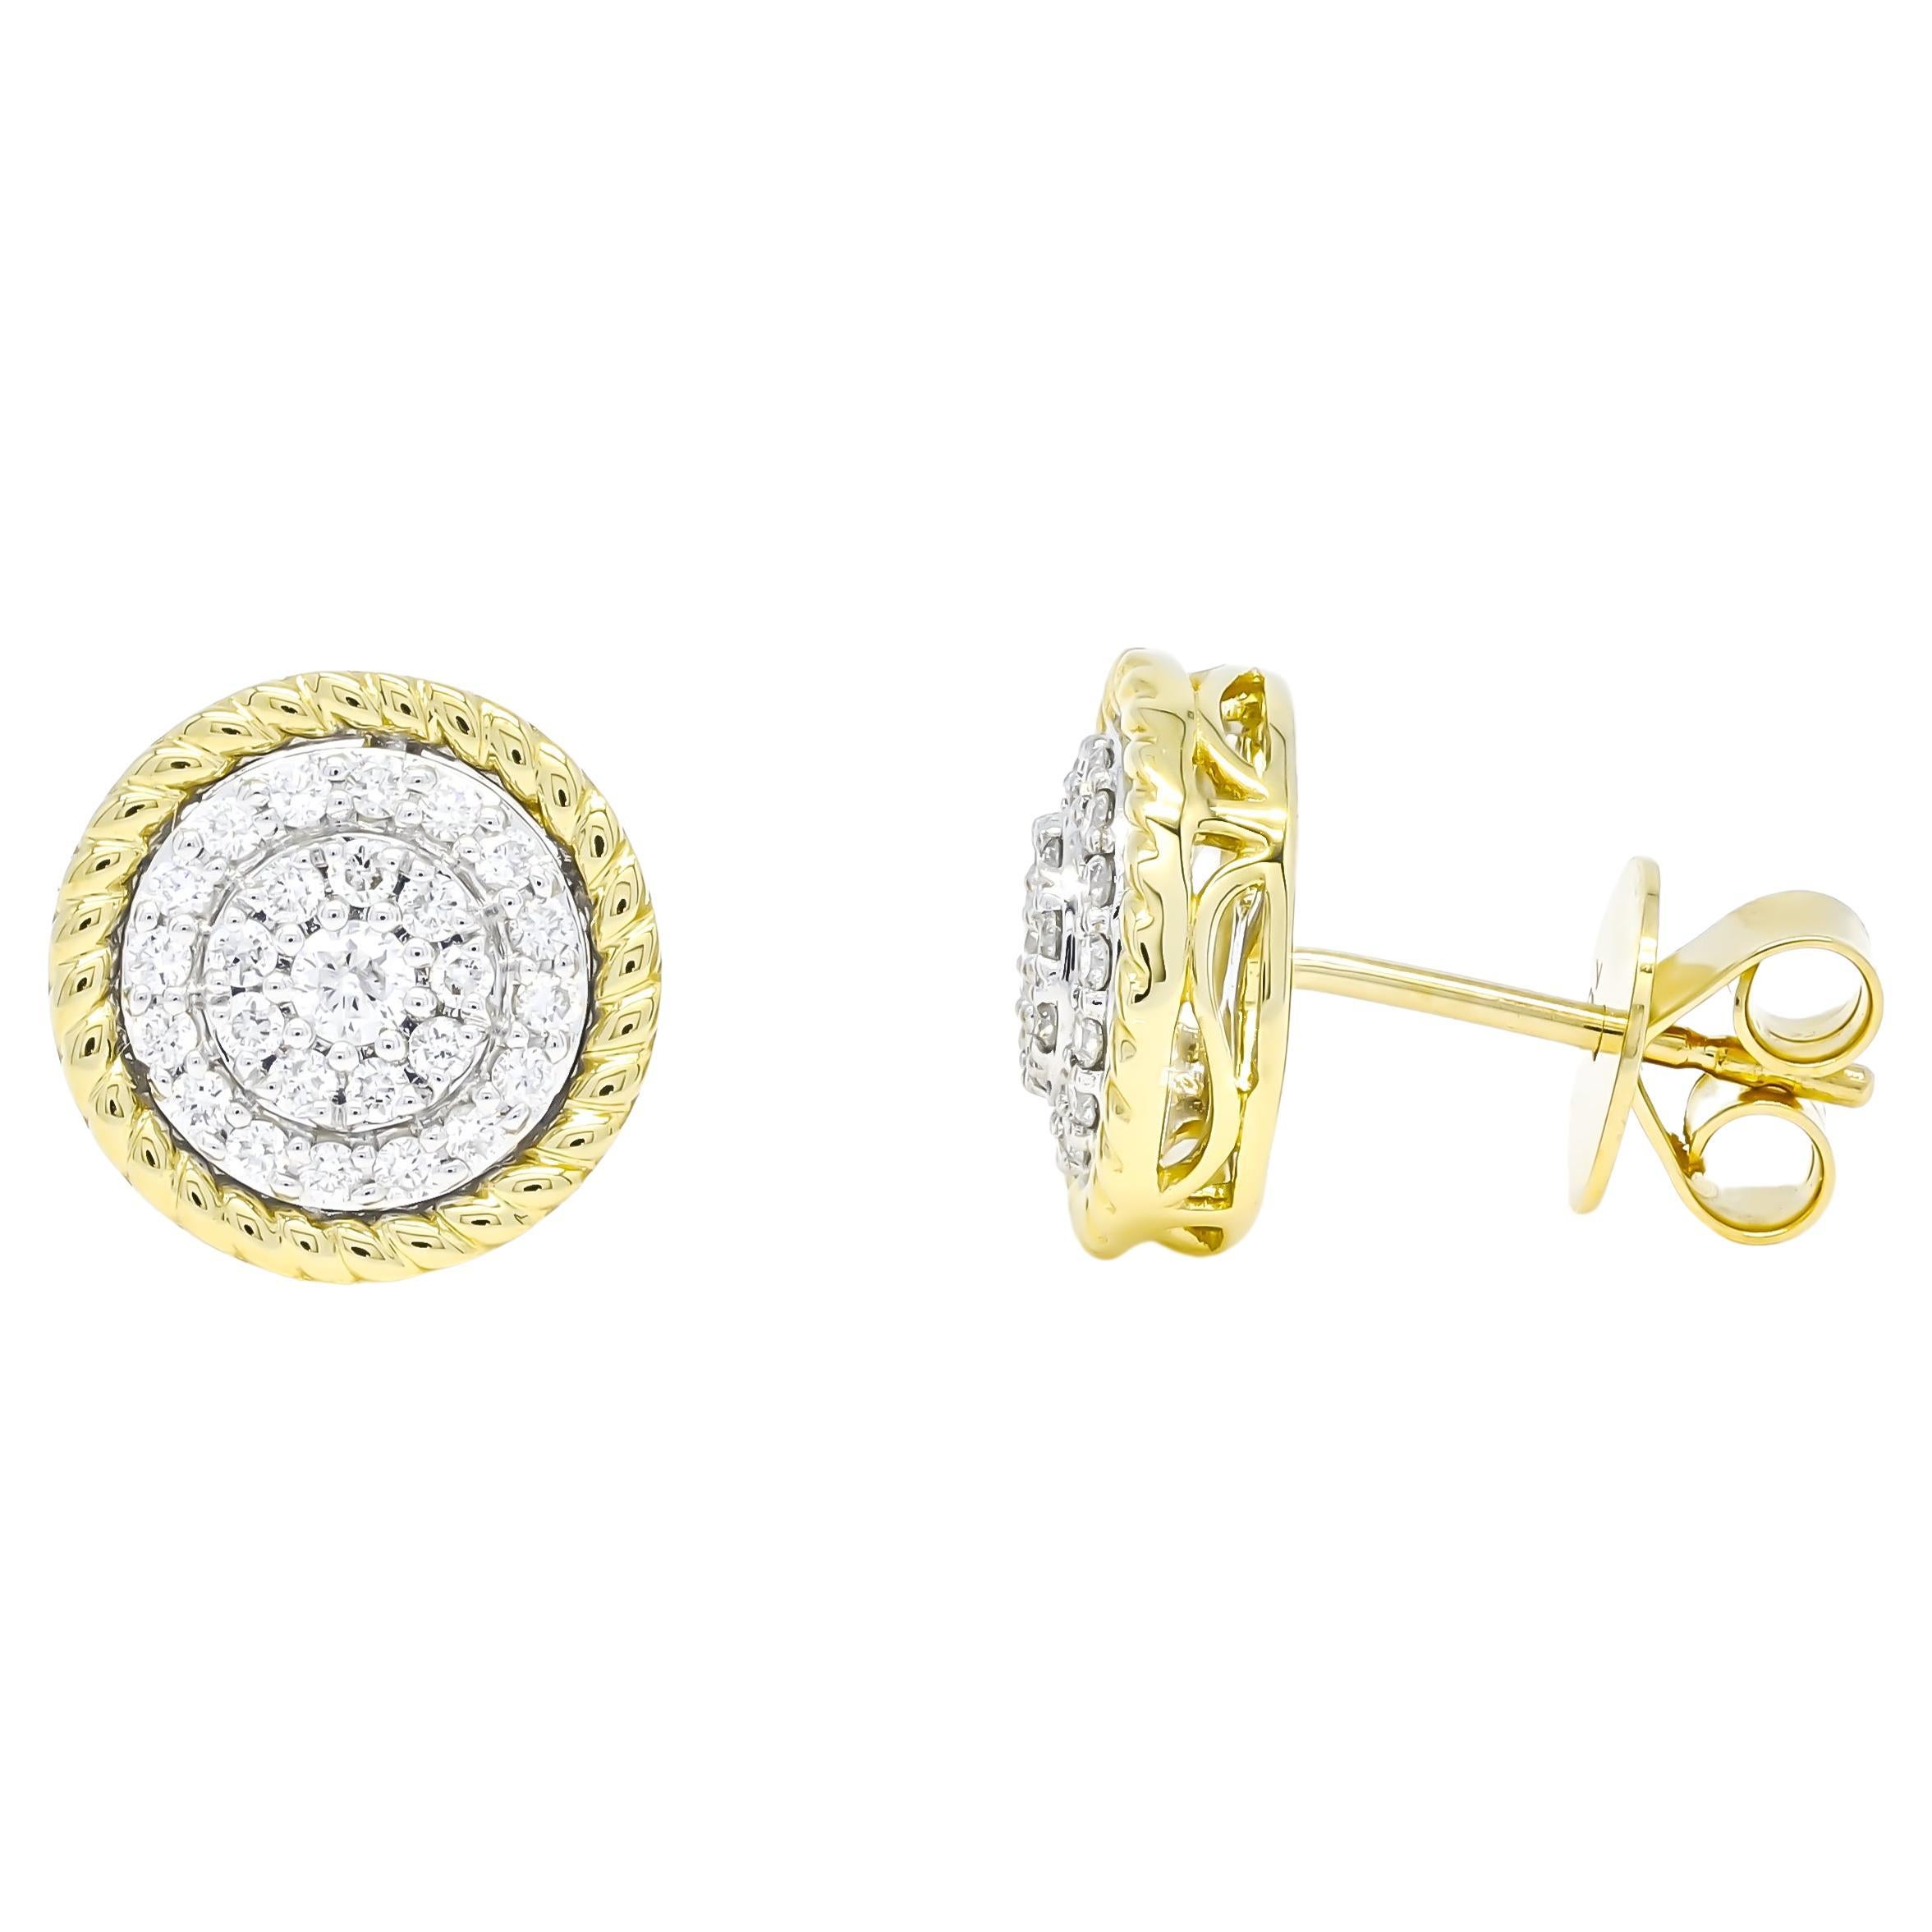  Natural Diamonds 0.50 carats 18 Karat Two Tone Gold Stud Earrings For Sale